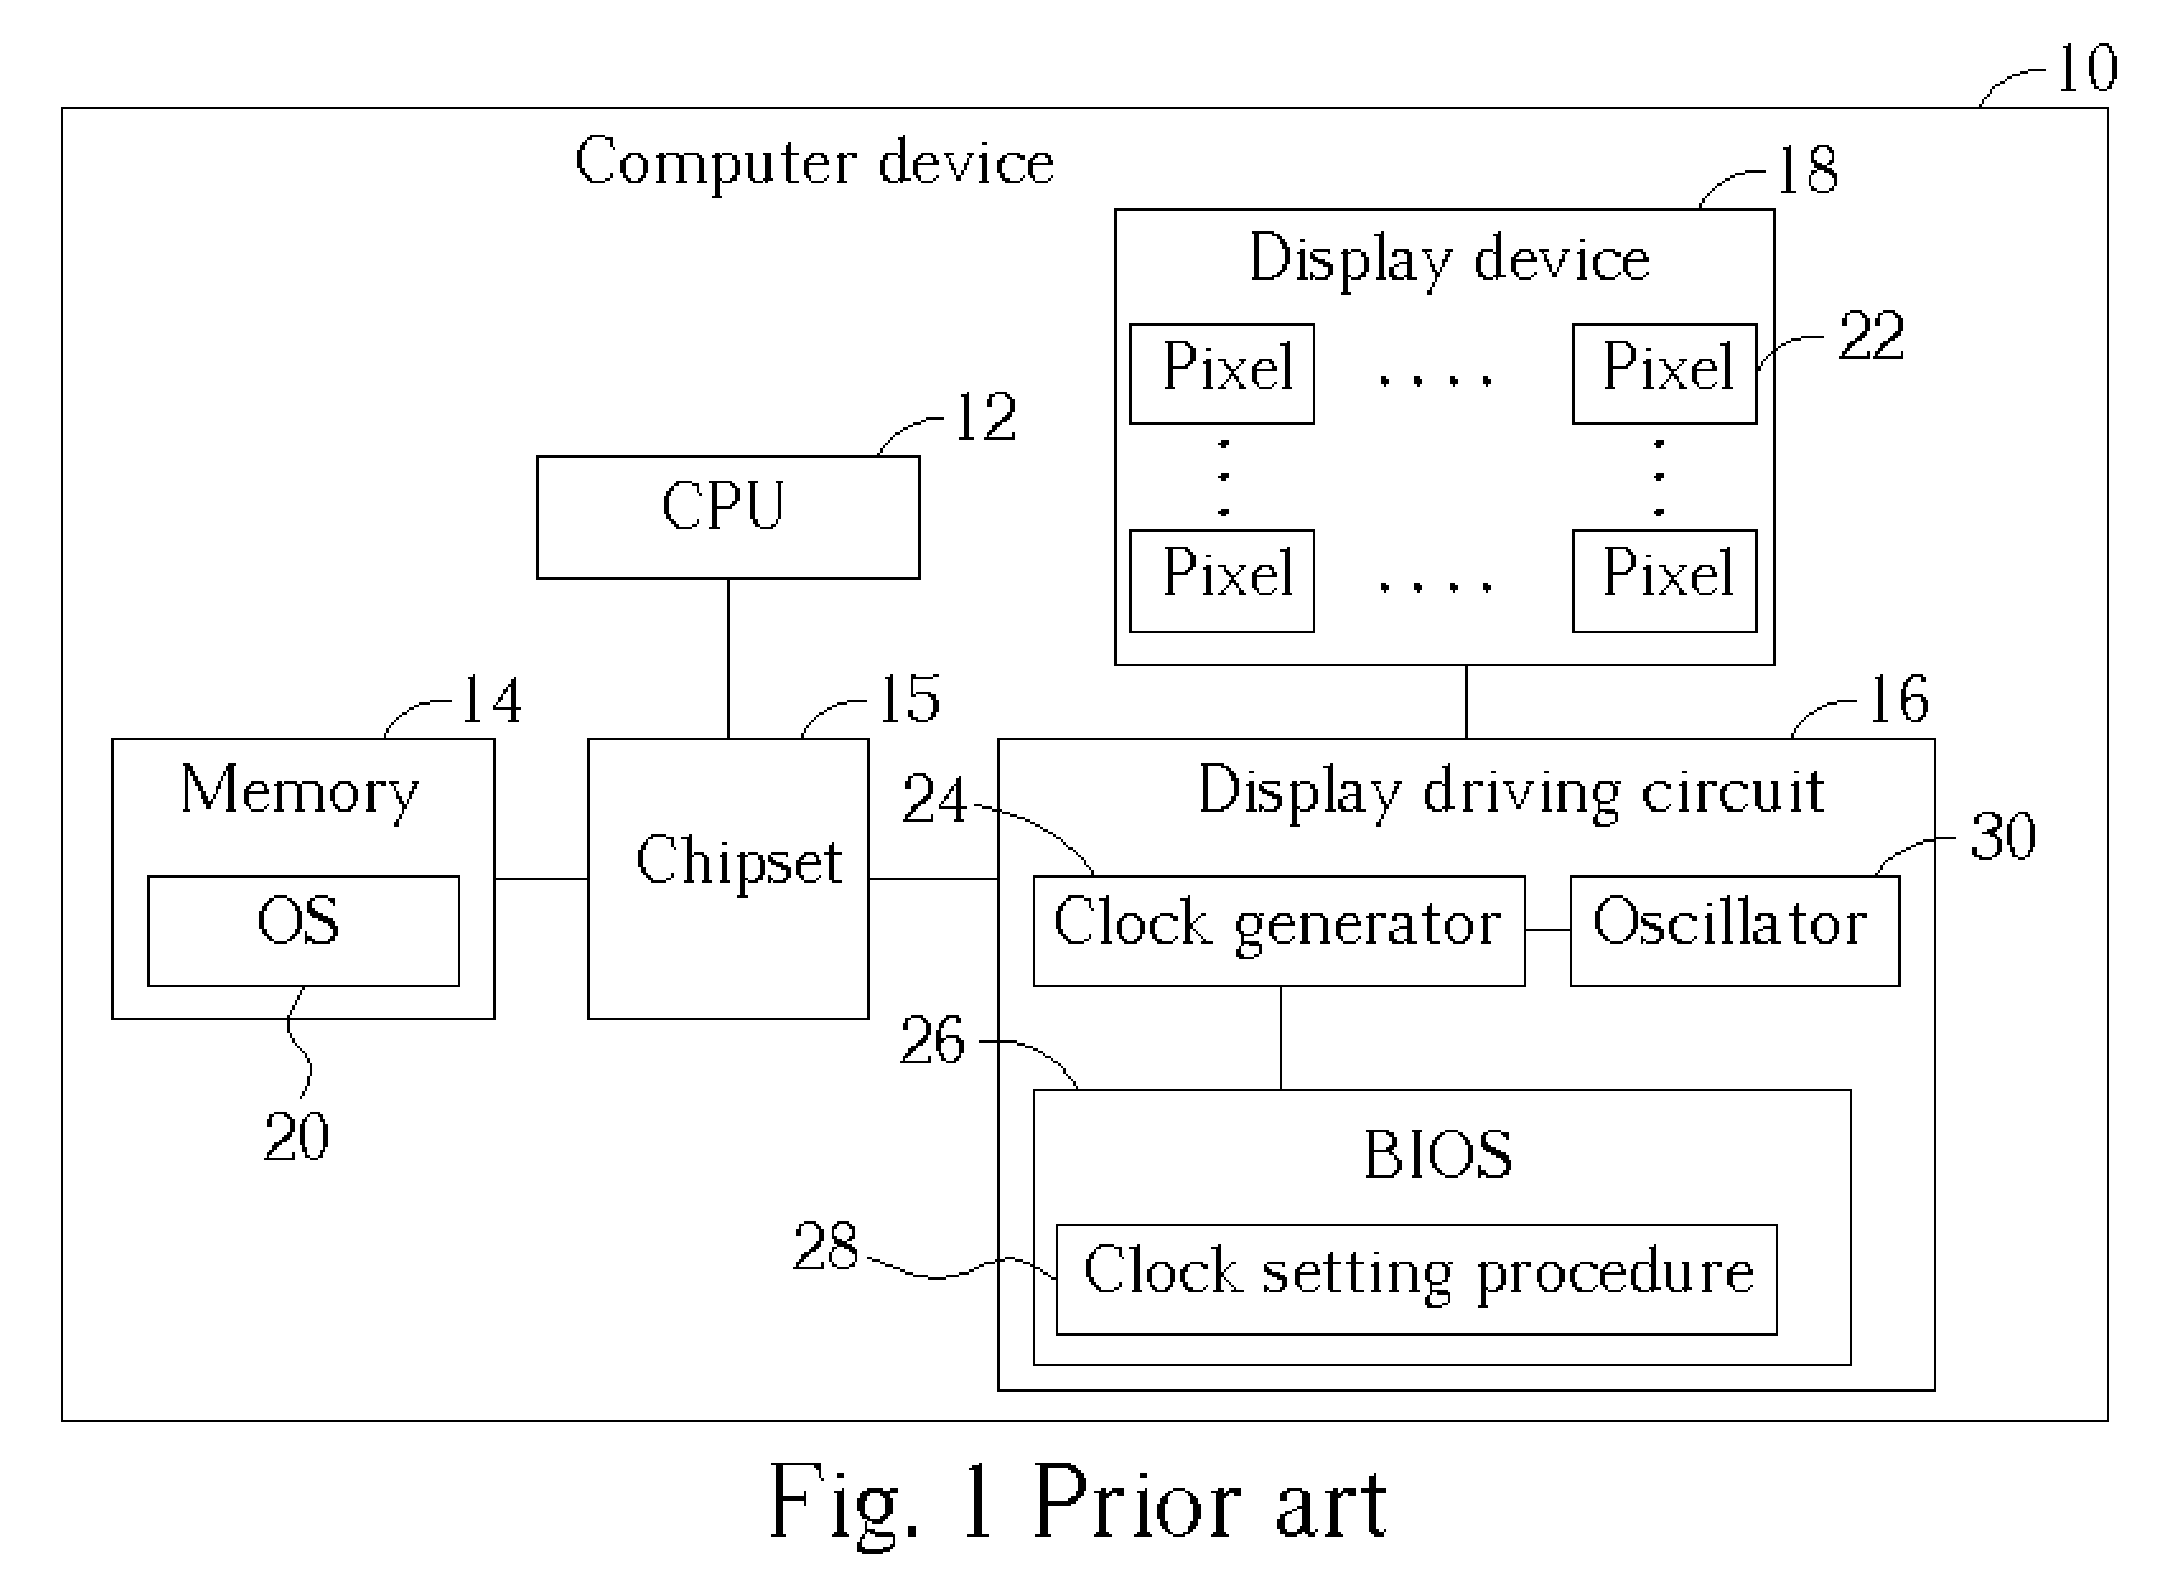 Method for setting a pixel clock of a display driving circuit